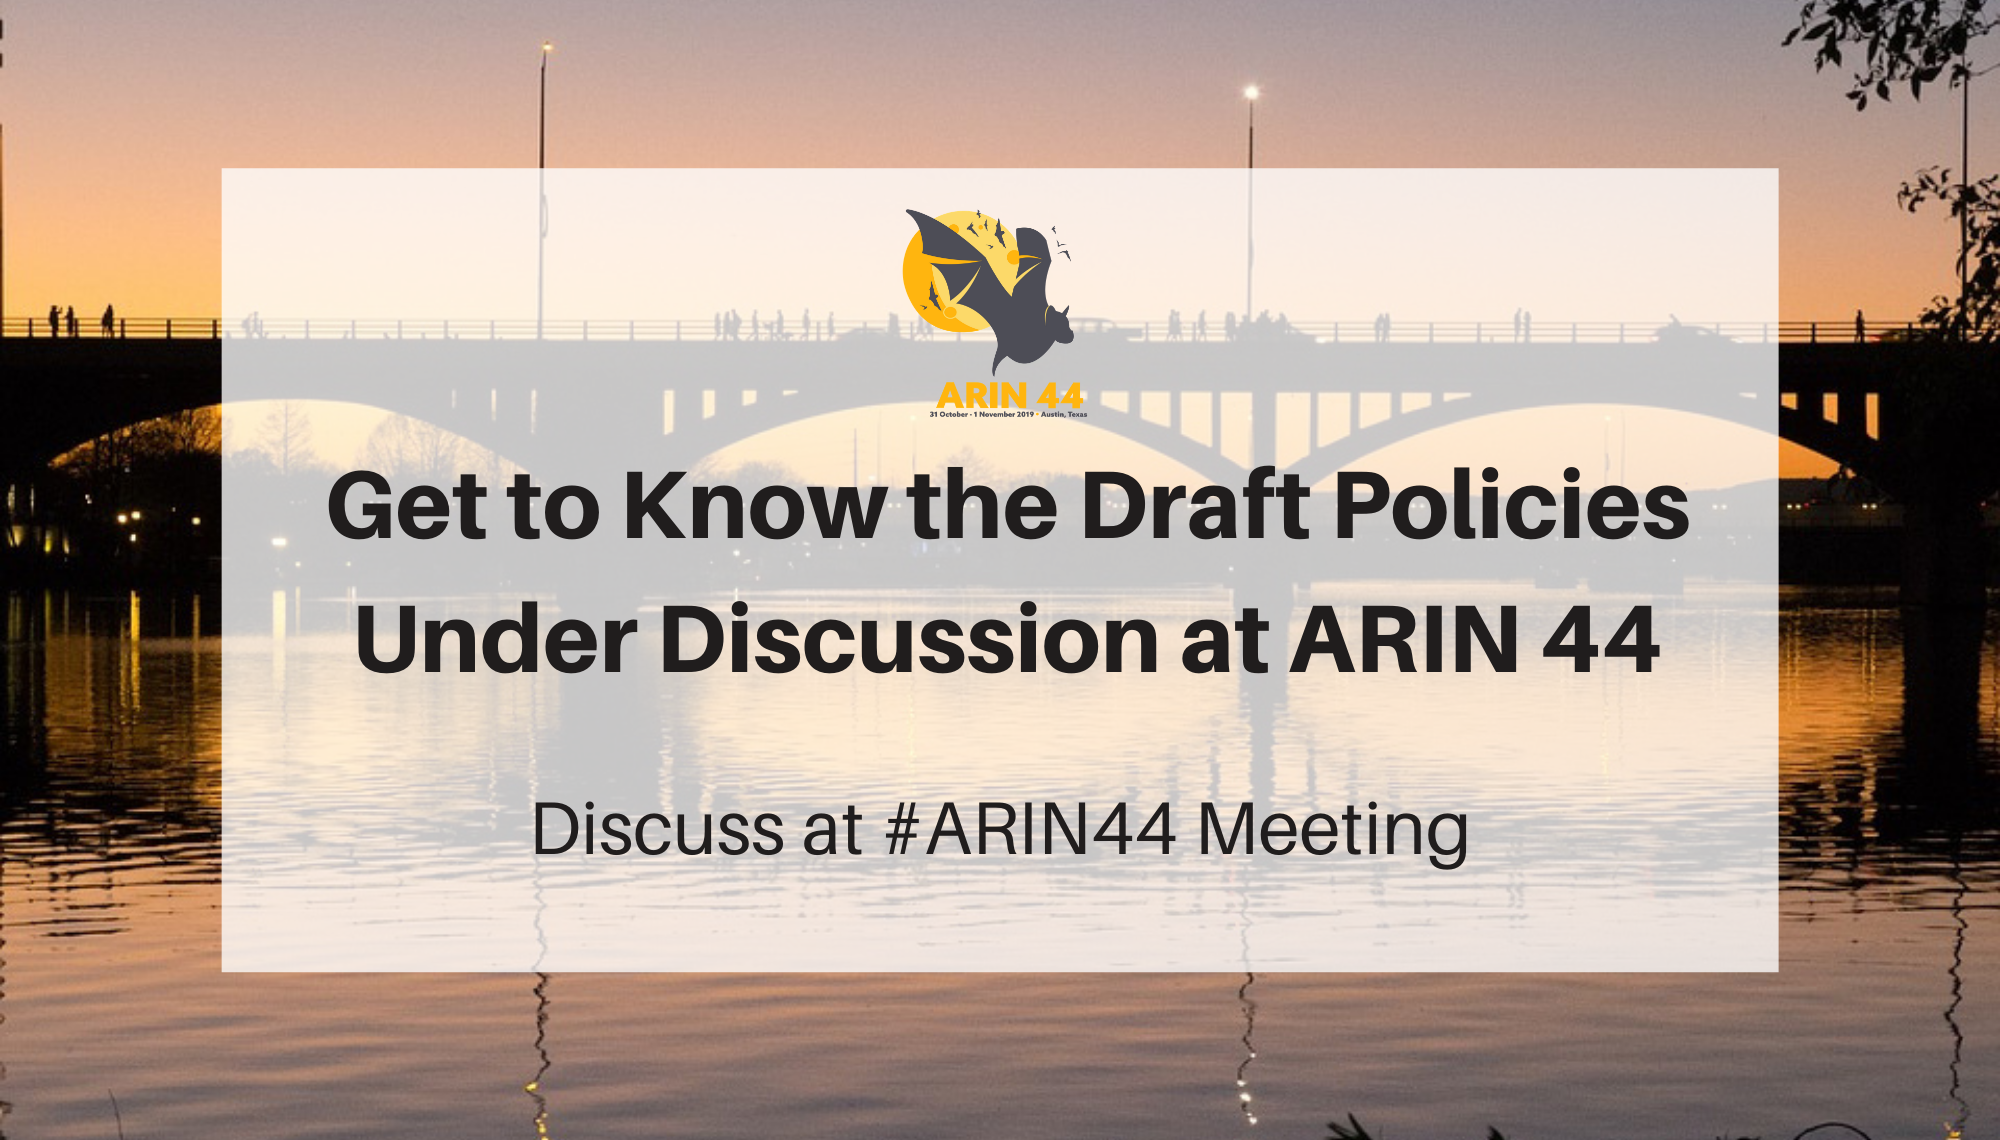 Get to Know the Draft Policies Under Discussion at ARIN 44